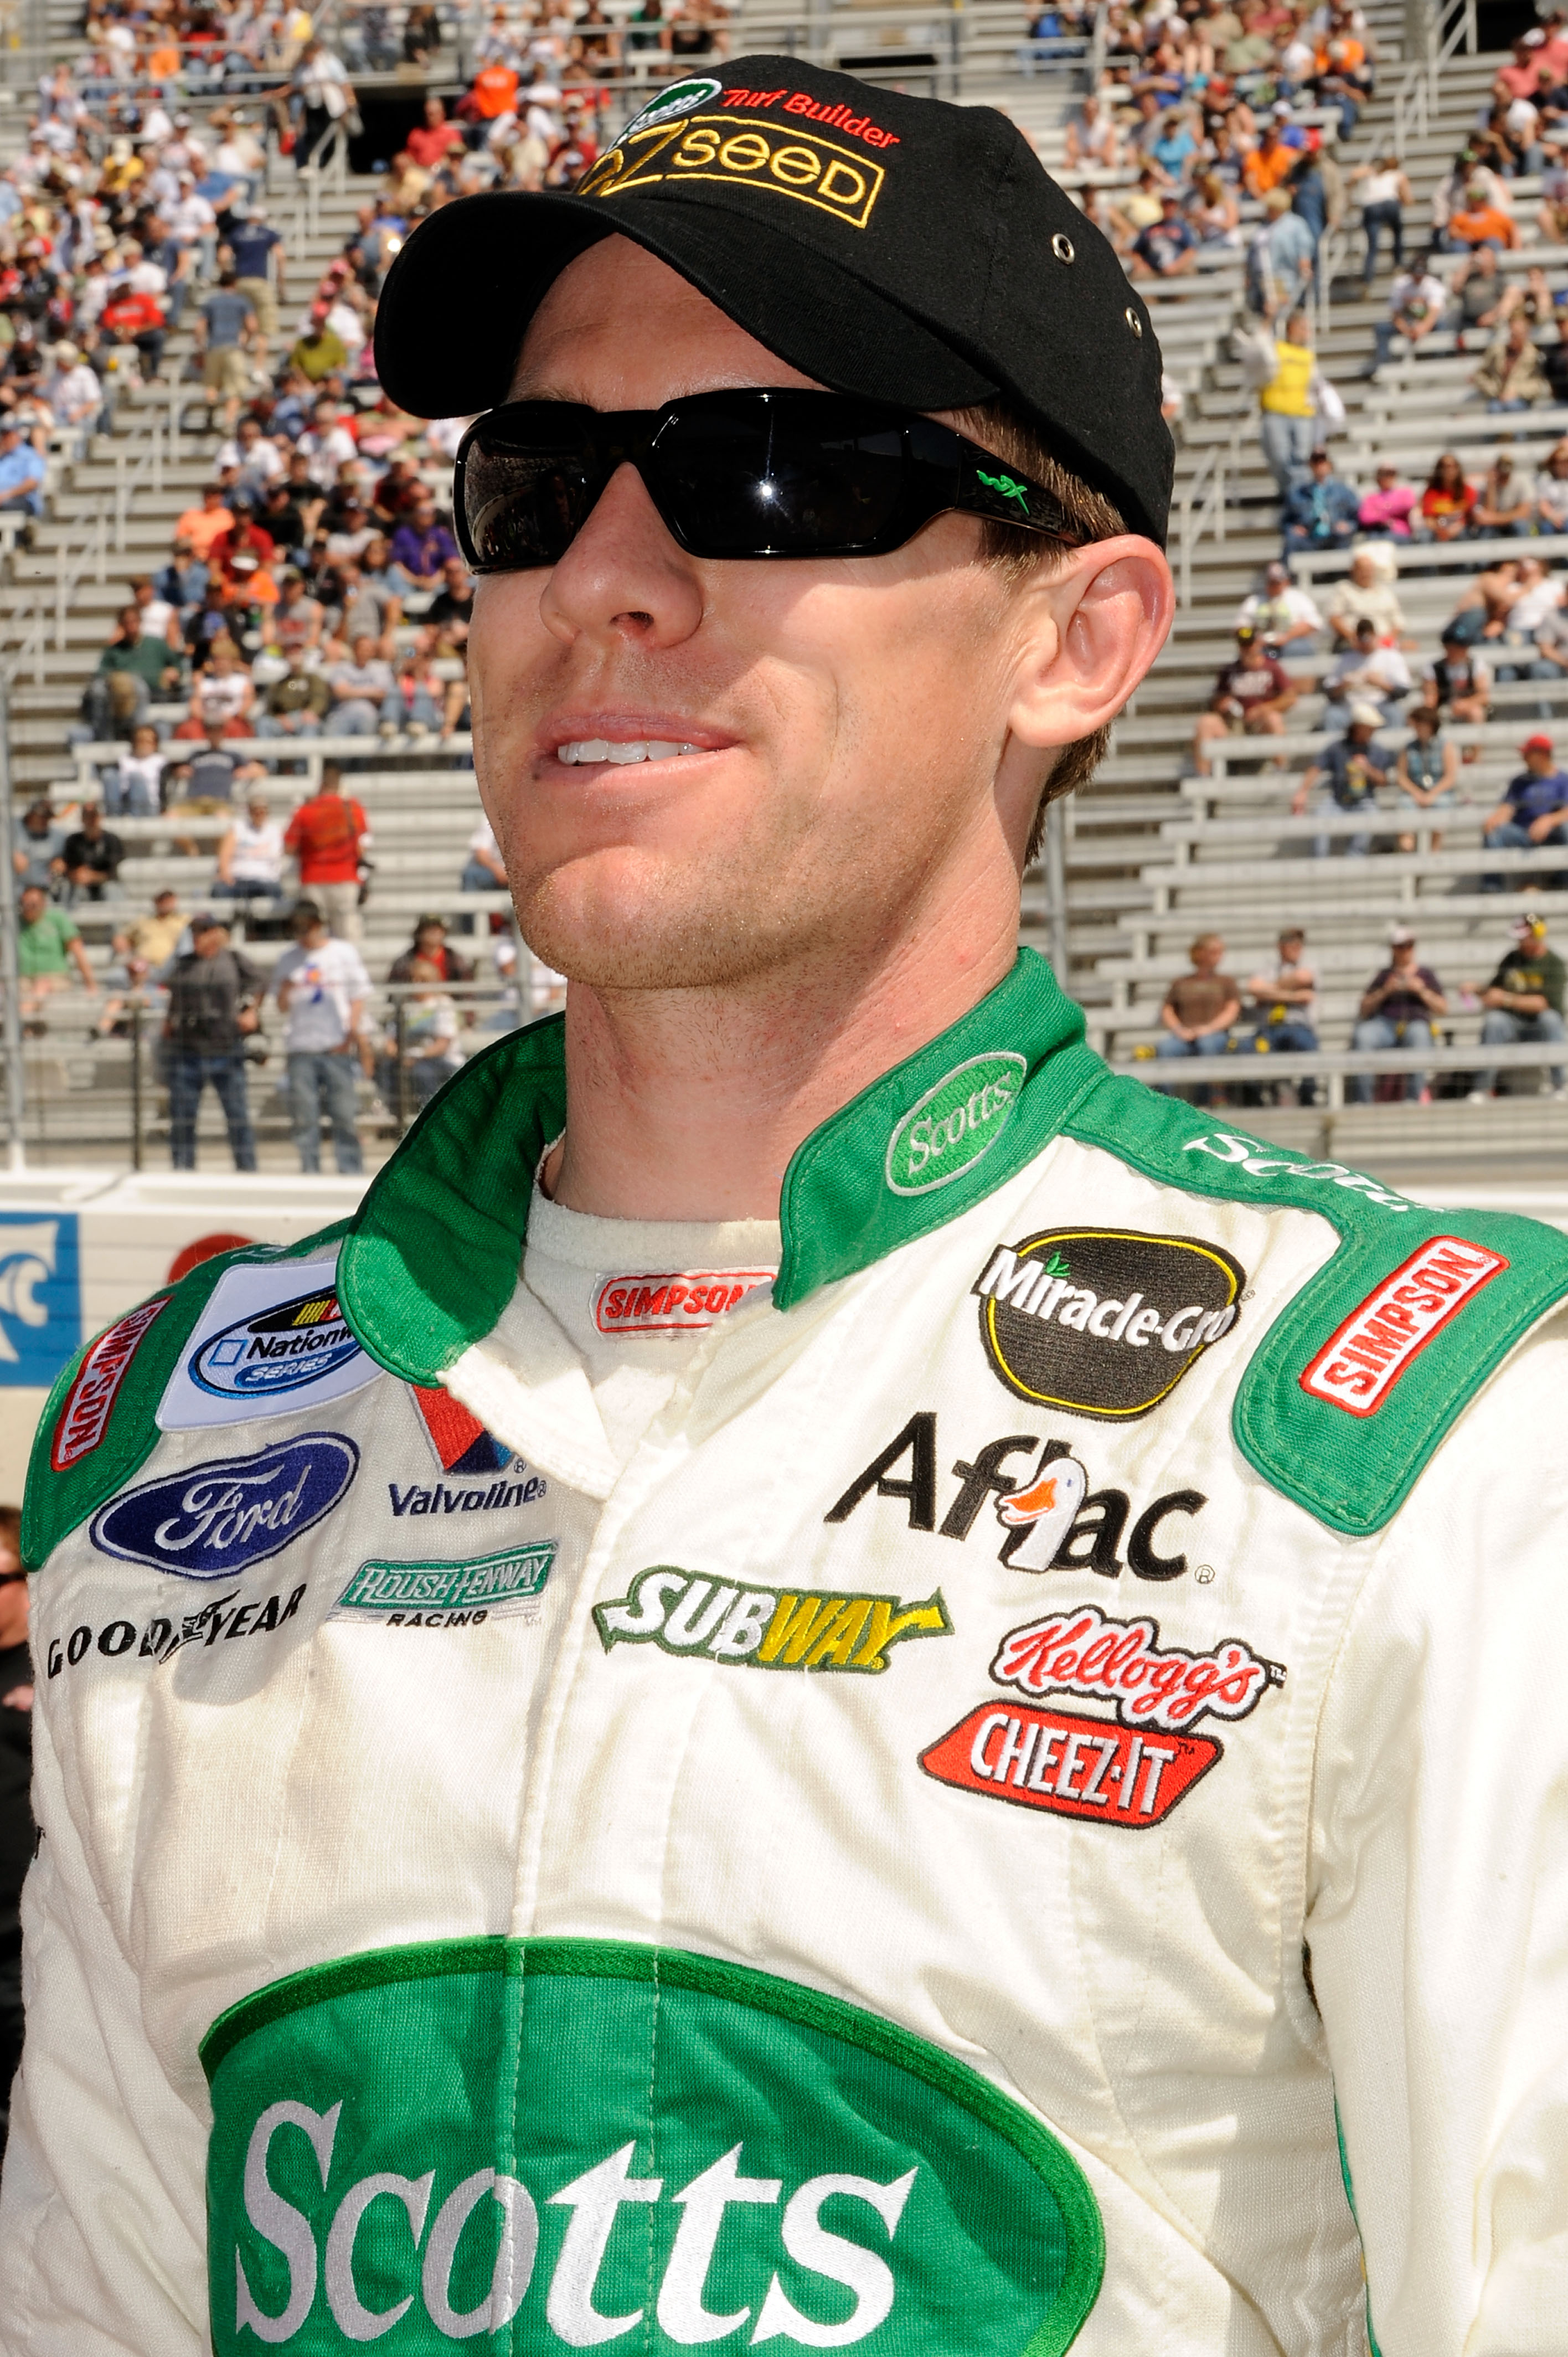 BRISTOL, TN - MARCH 19:  Carl Edwards, driver of the #60 Scotts EZ Seed Ford, stands next to his car on the grid prior to the start of the NASCAR Nationwide Series Scotts EZ Seed 300 at Bristol Motor Speedway on March 19, 2011 in Bristol, Tennessee.  (Pho